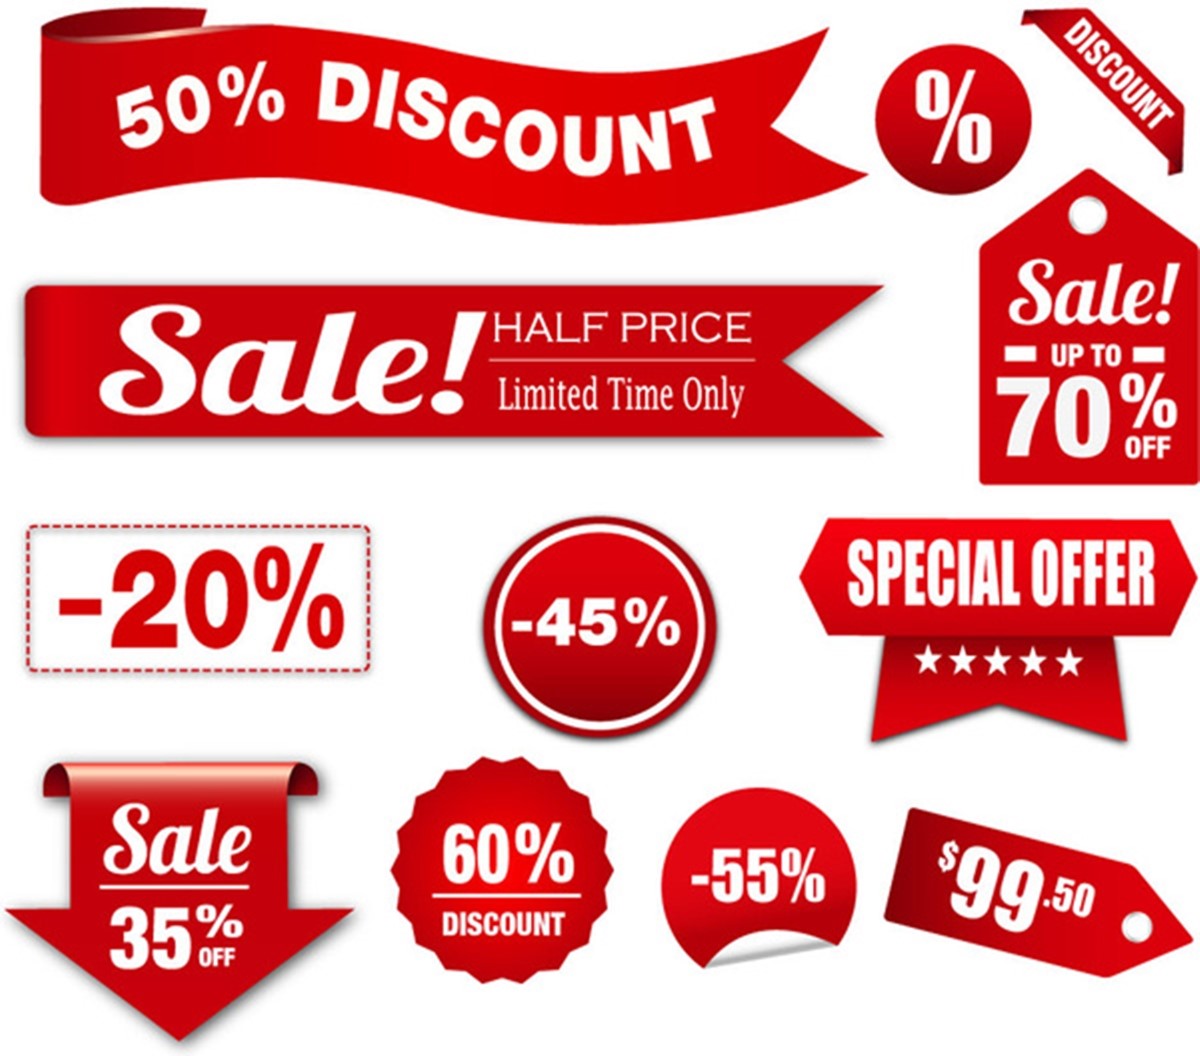 Integrated Marketing Communication tools: Sale promotion